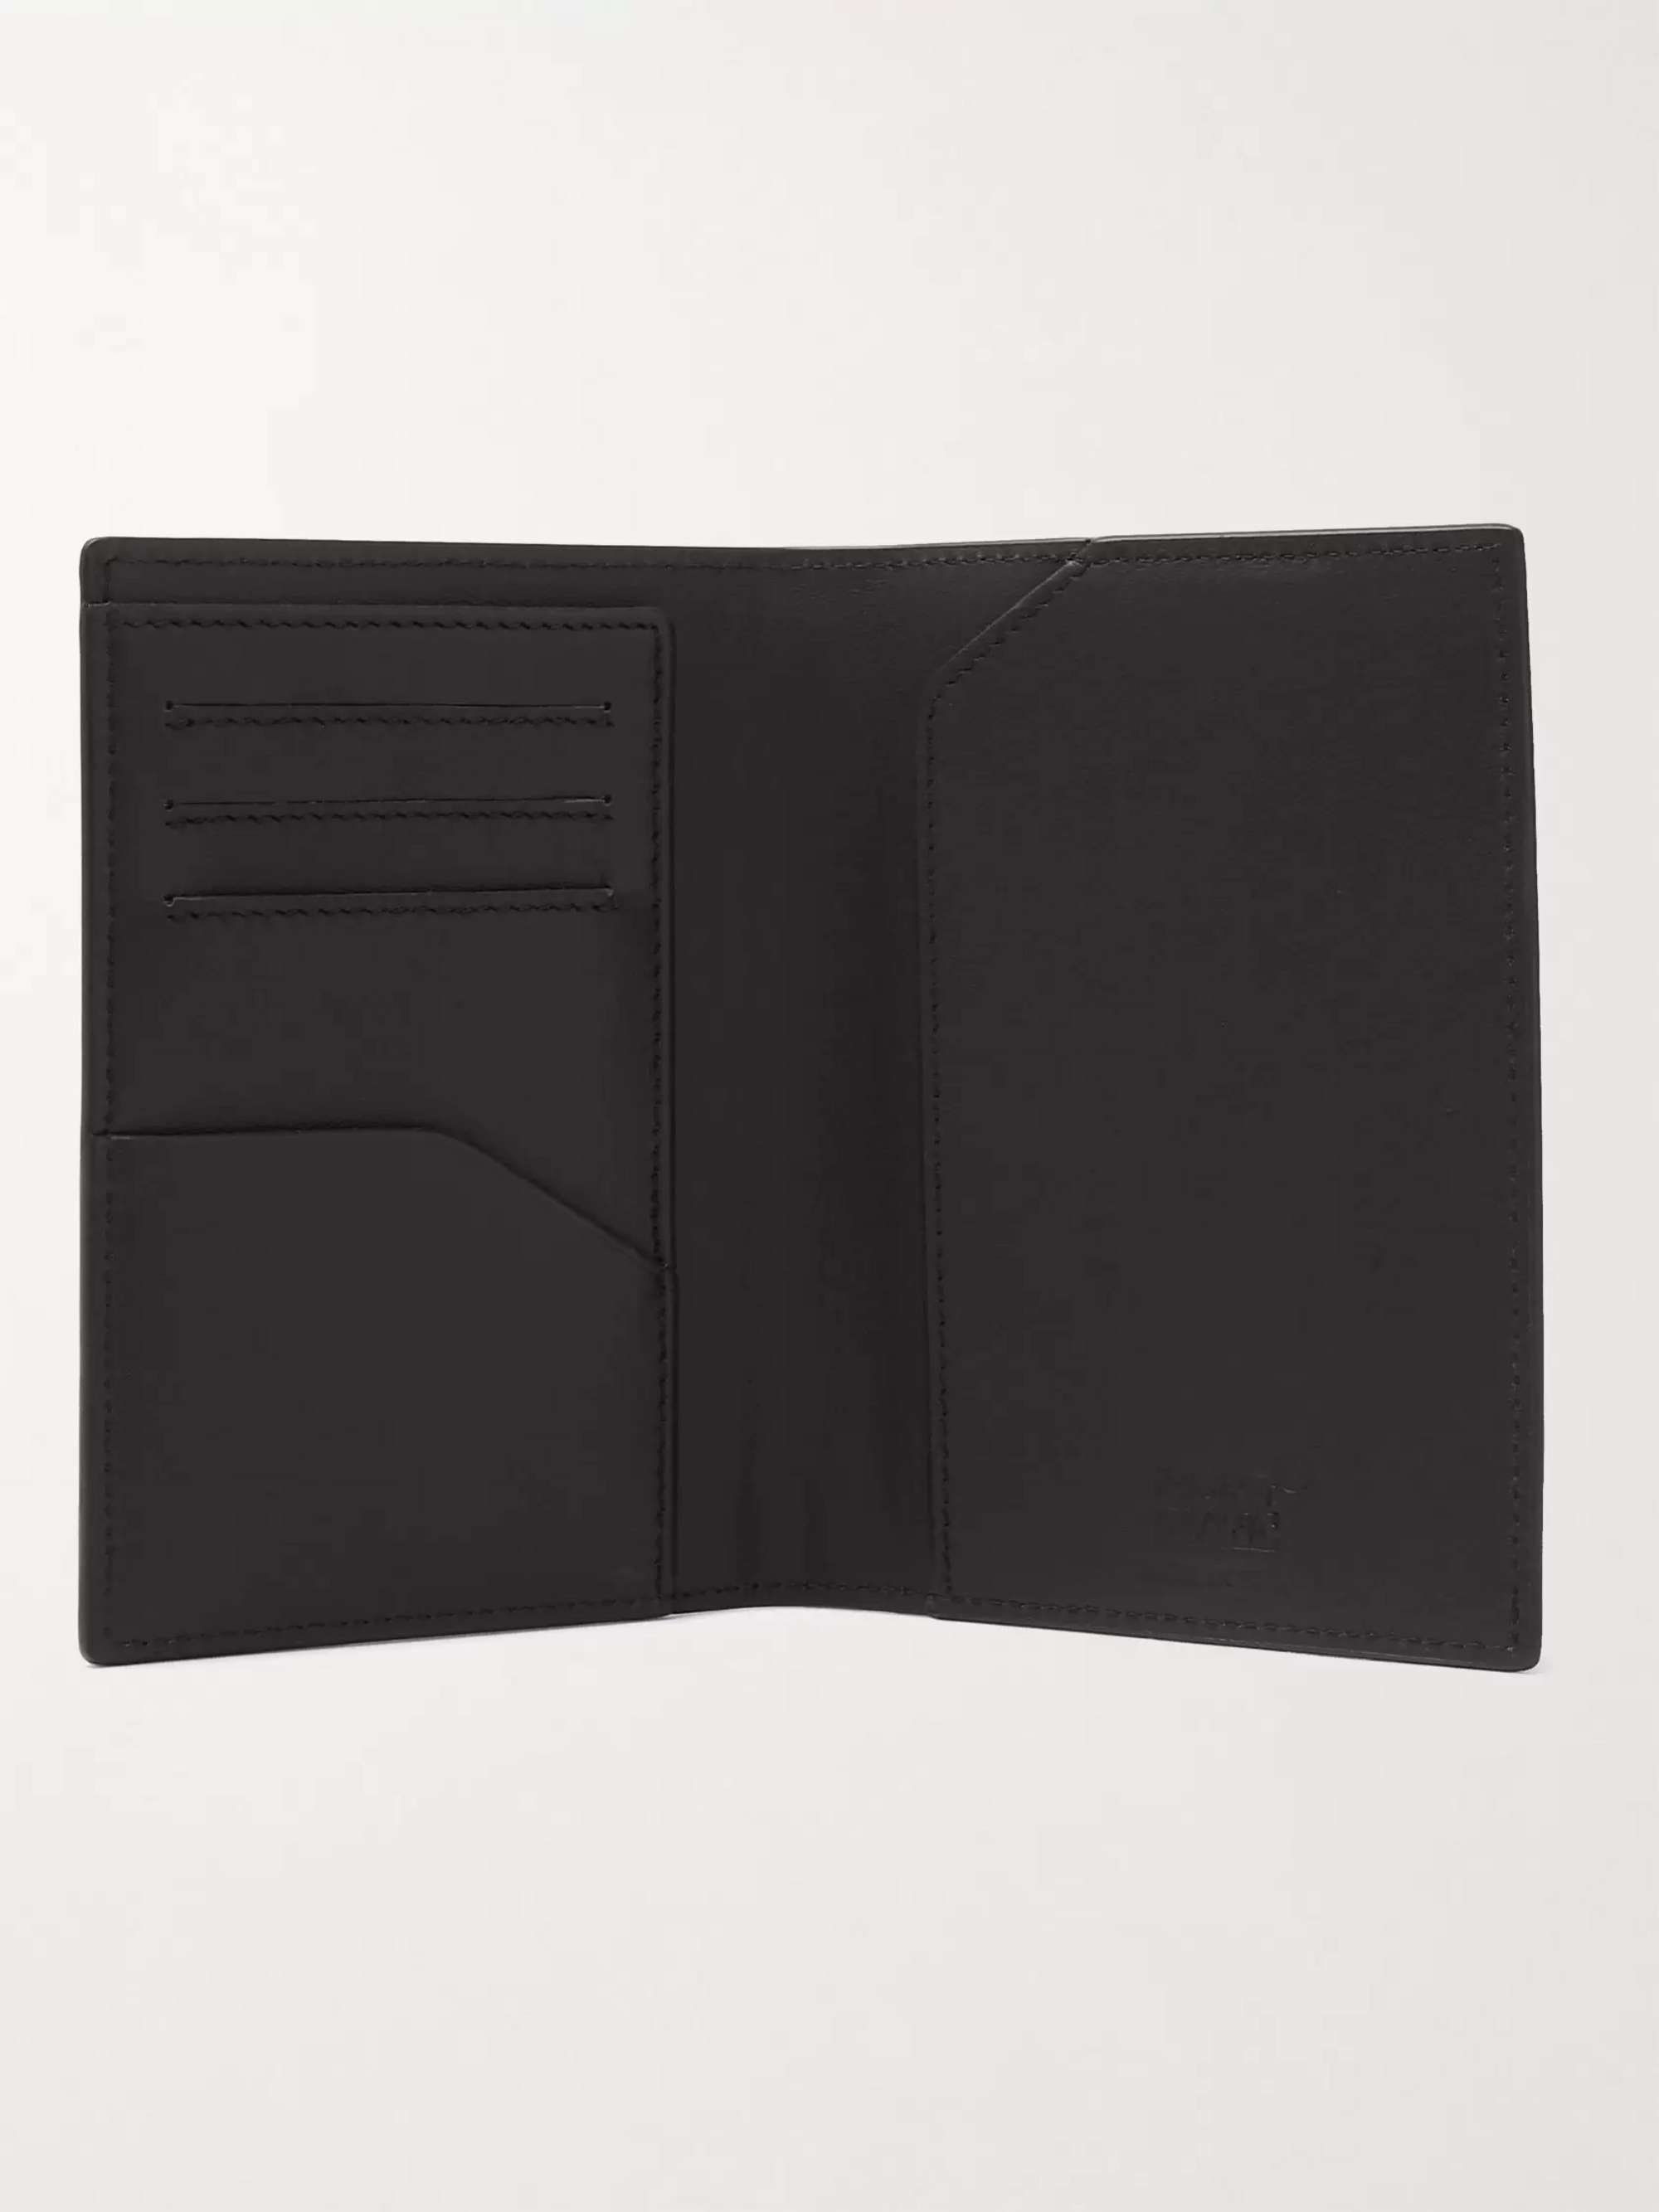 MONTBLANC Printed Leather Passport Cover